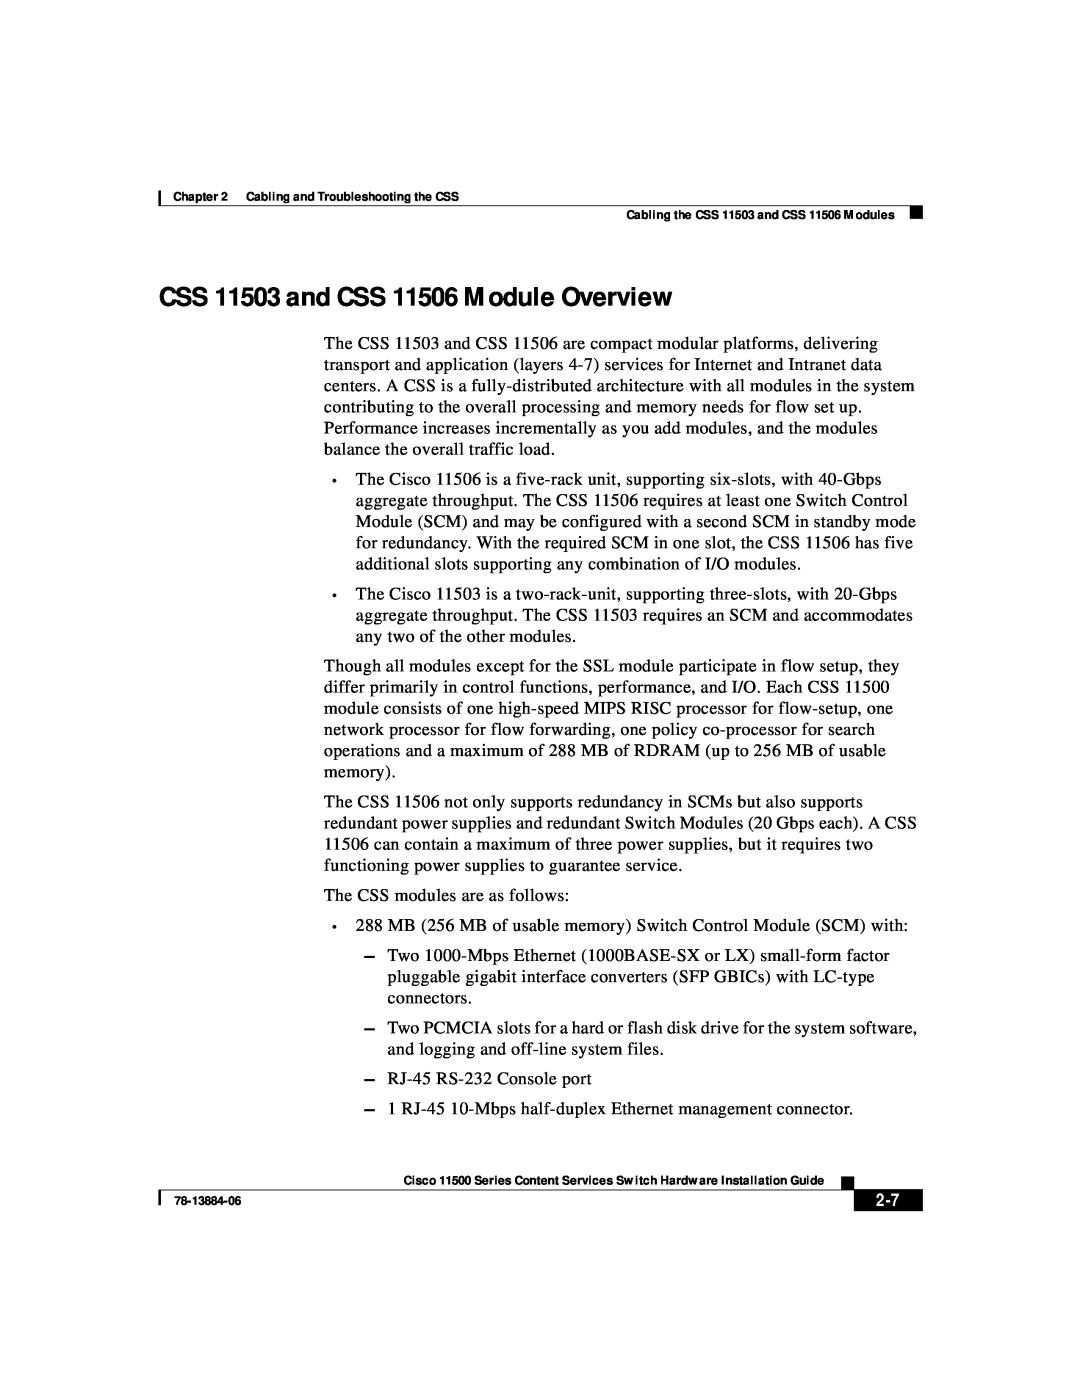 Cisco Systems 11500 Series manual CSS 11503 and CSS 11506 Module Overview 